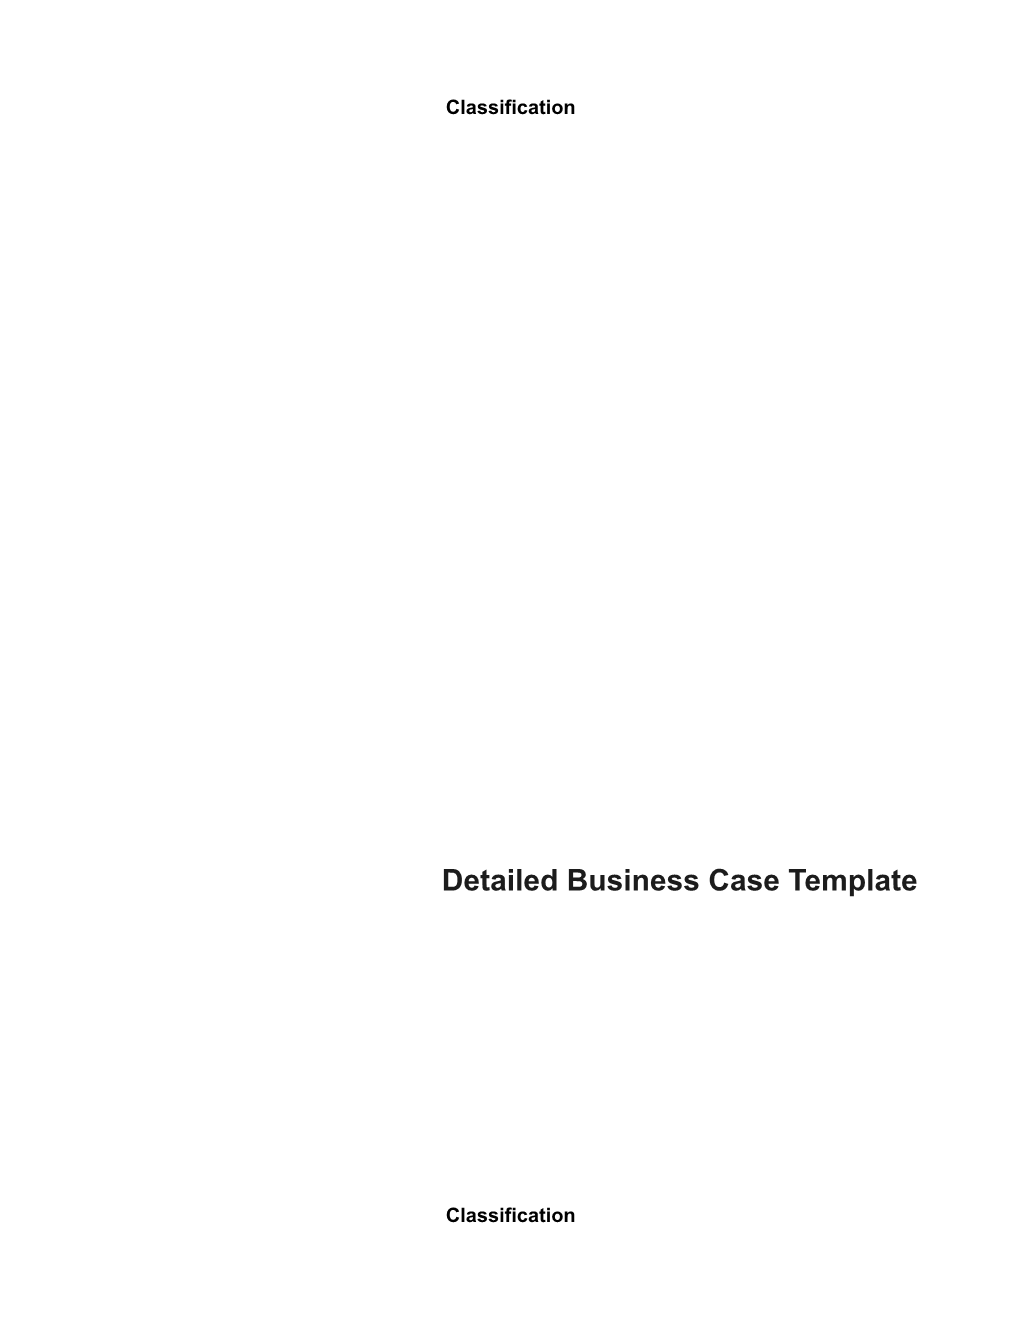 Detailed Business Case Template